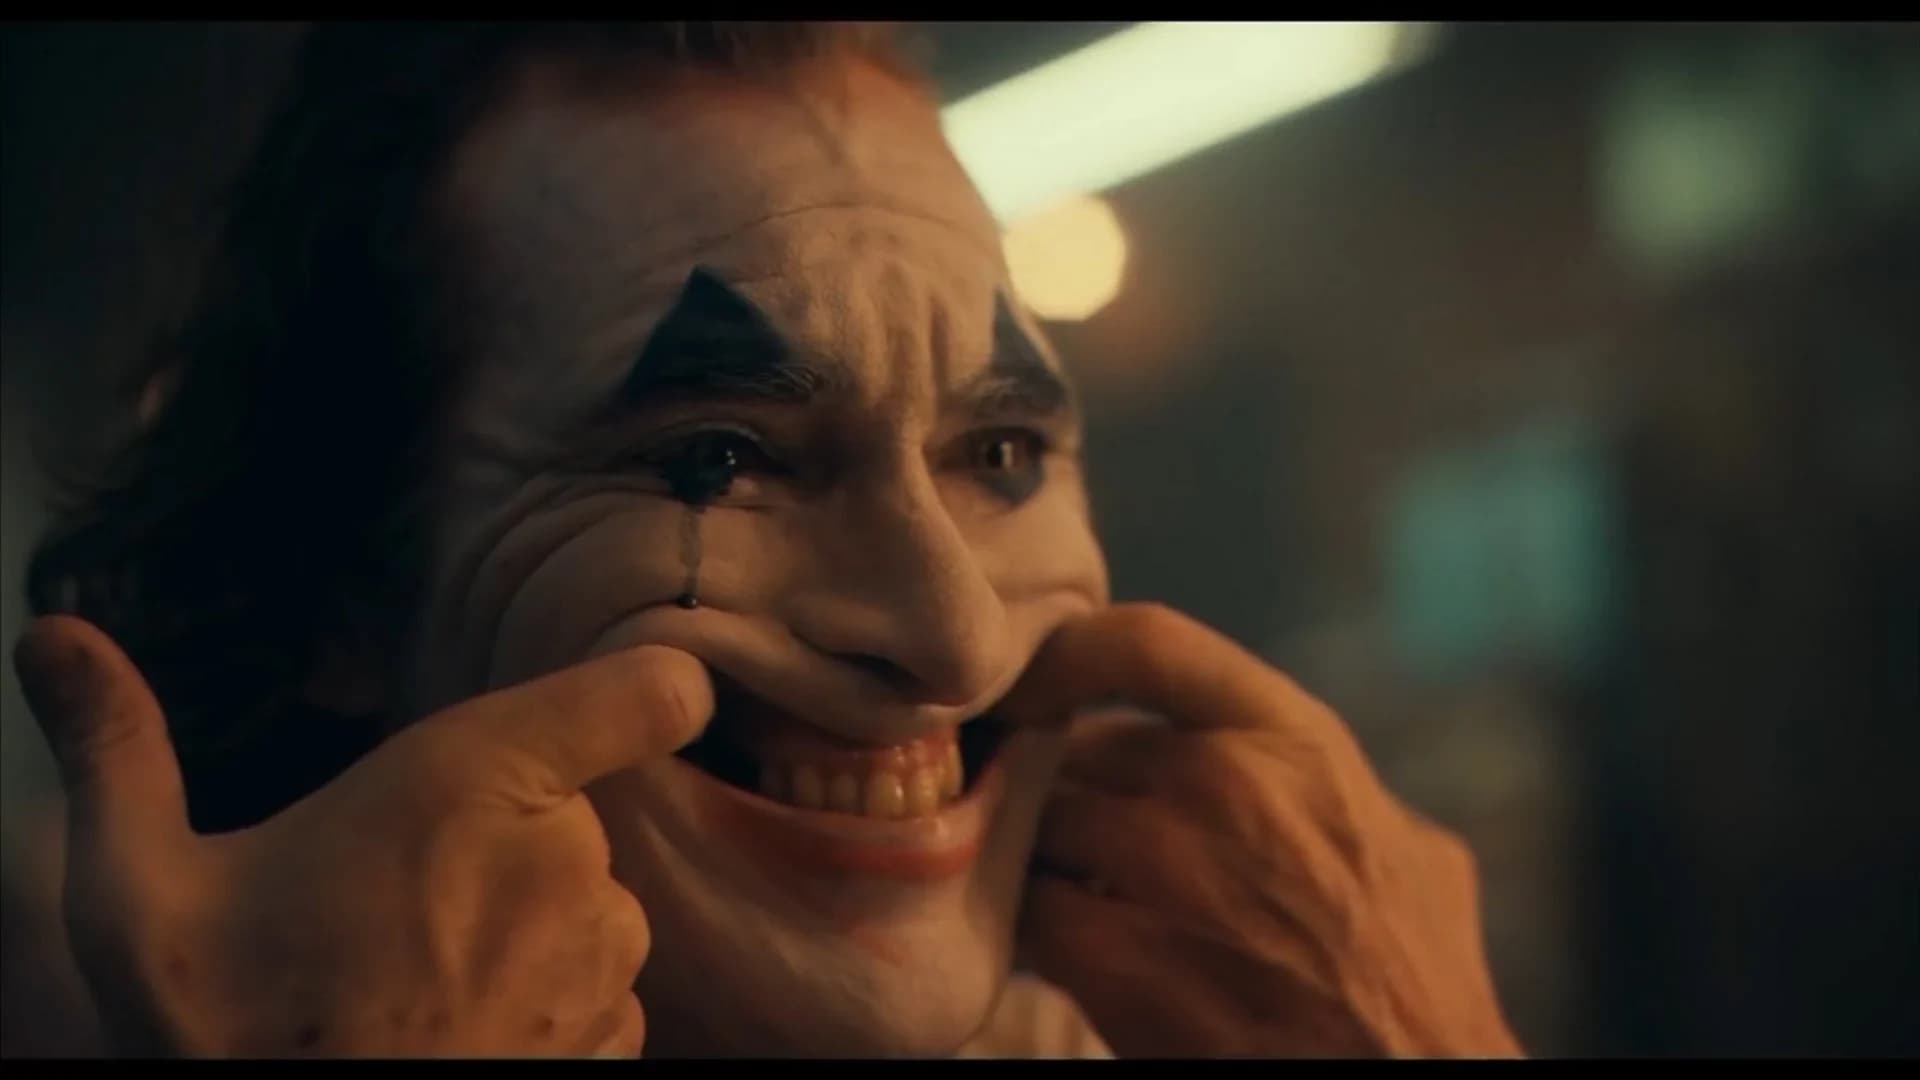 Report: FBI issues warning about potential threat at ‘Joker’ movie